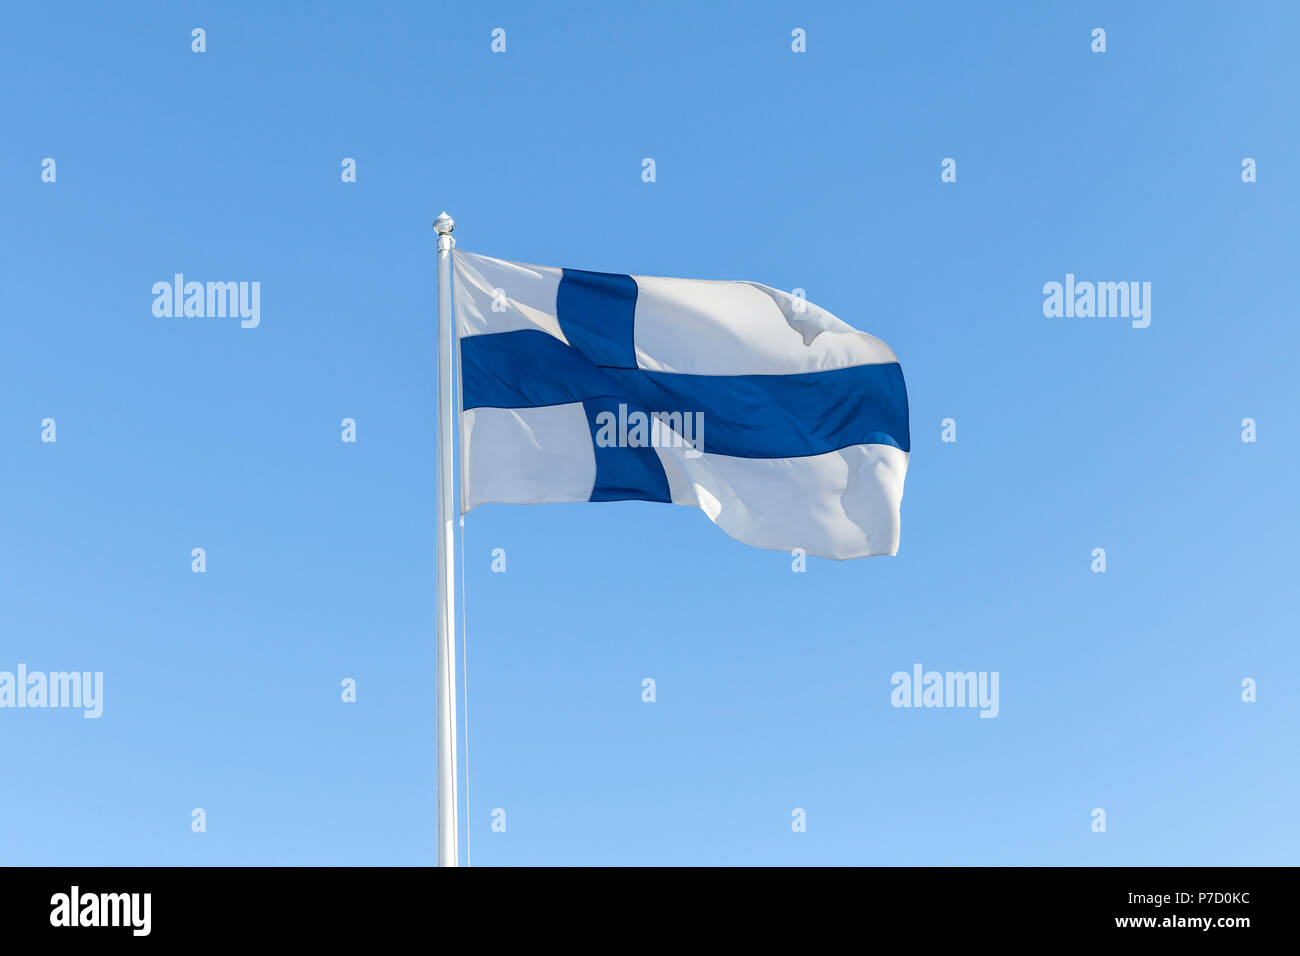 Flag of Finland, also called Blue Cross Flag waving over blue sky background Stock Photo